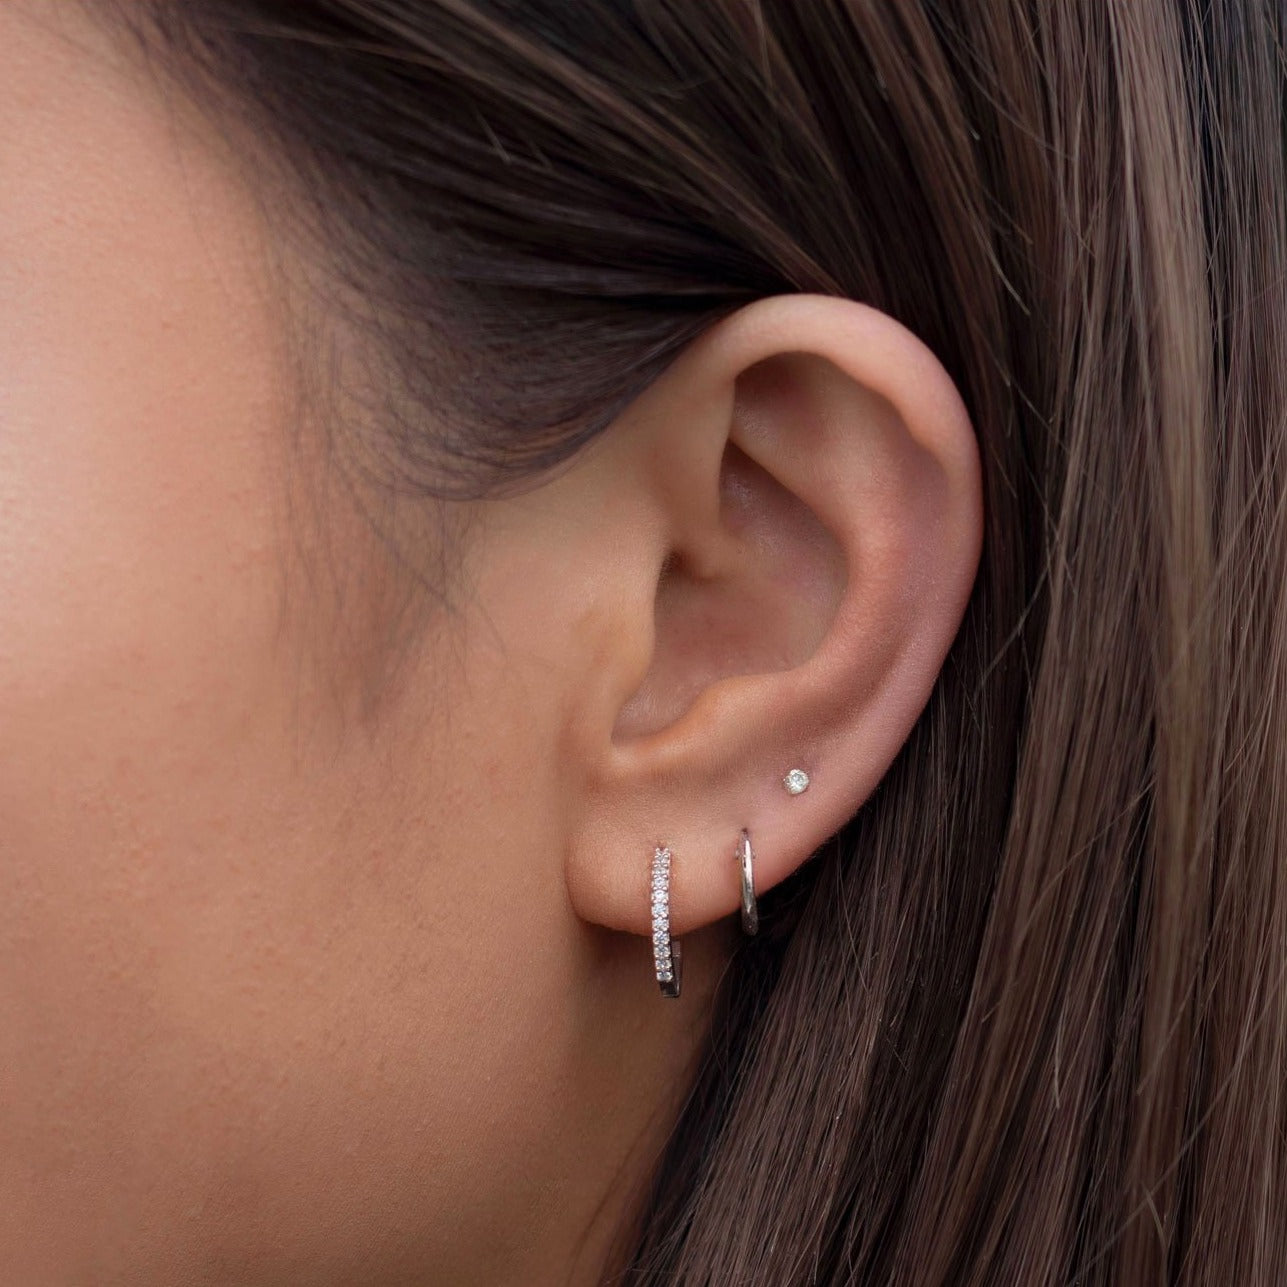 caption:Model's second hole:4.6mm, wearing 6.5mm